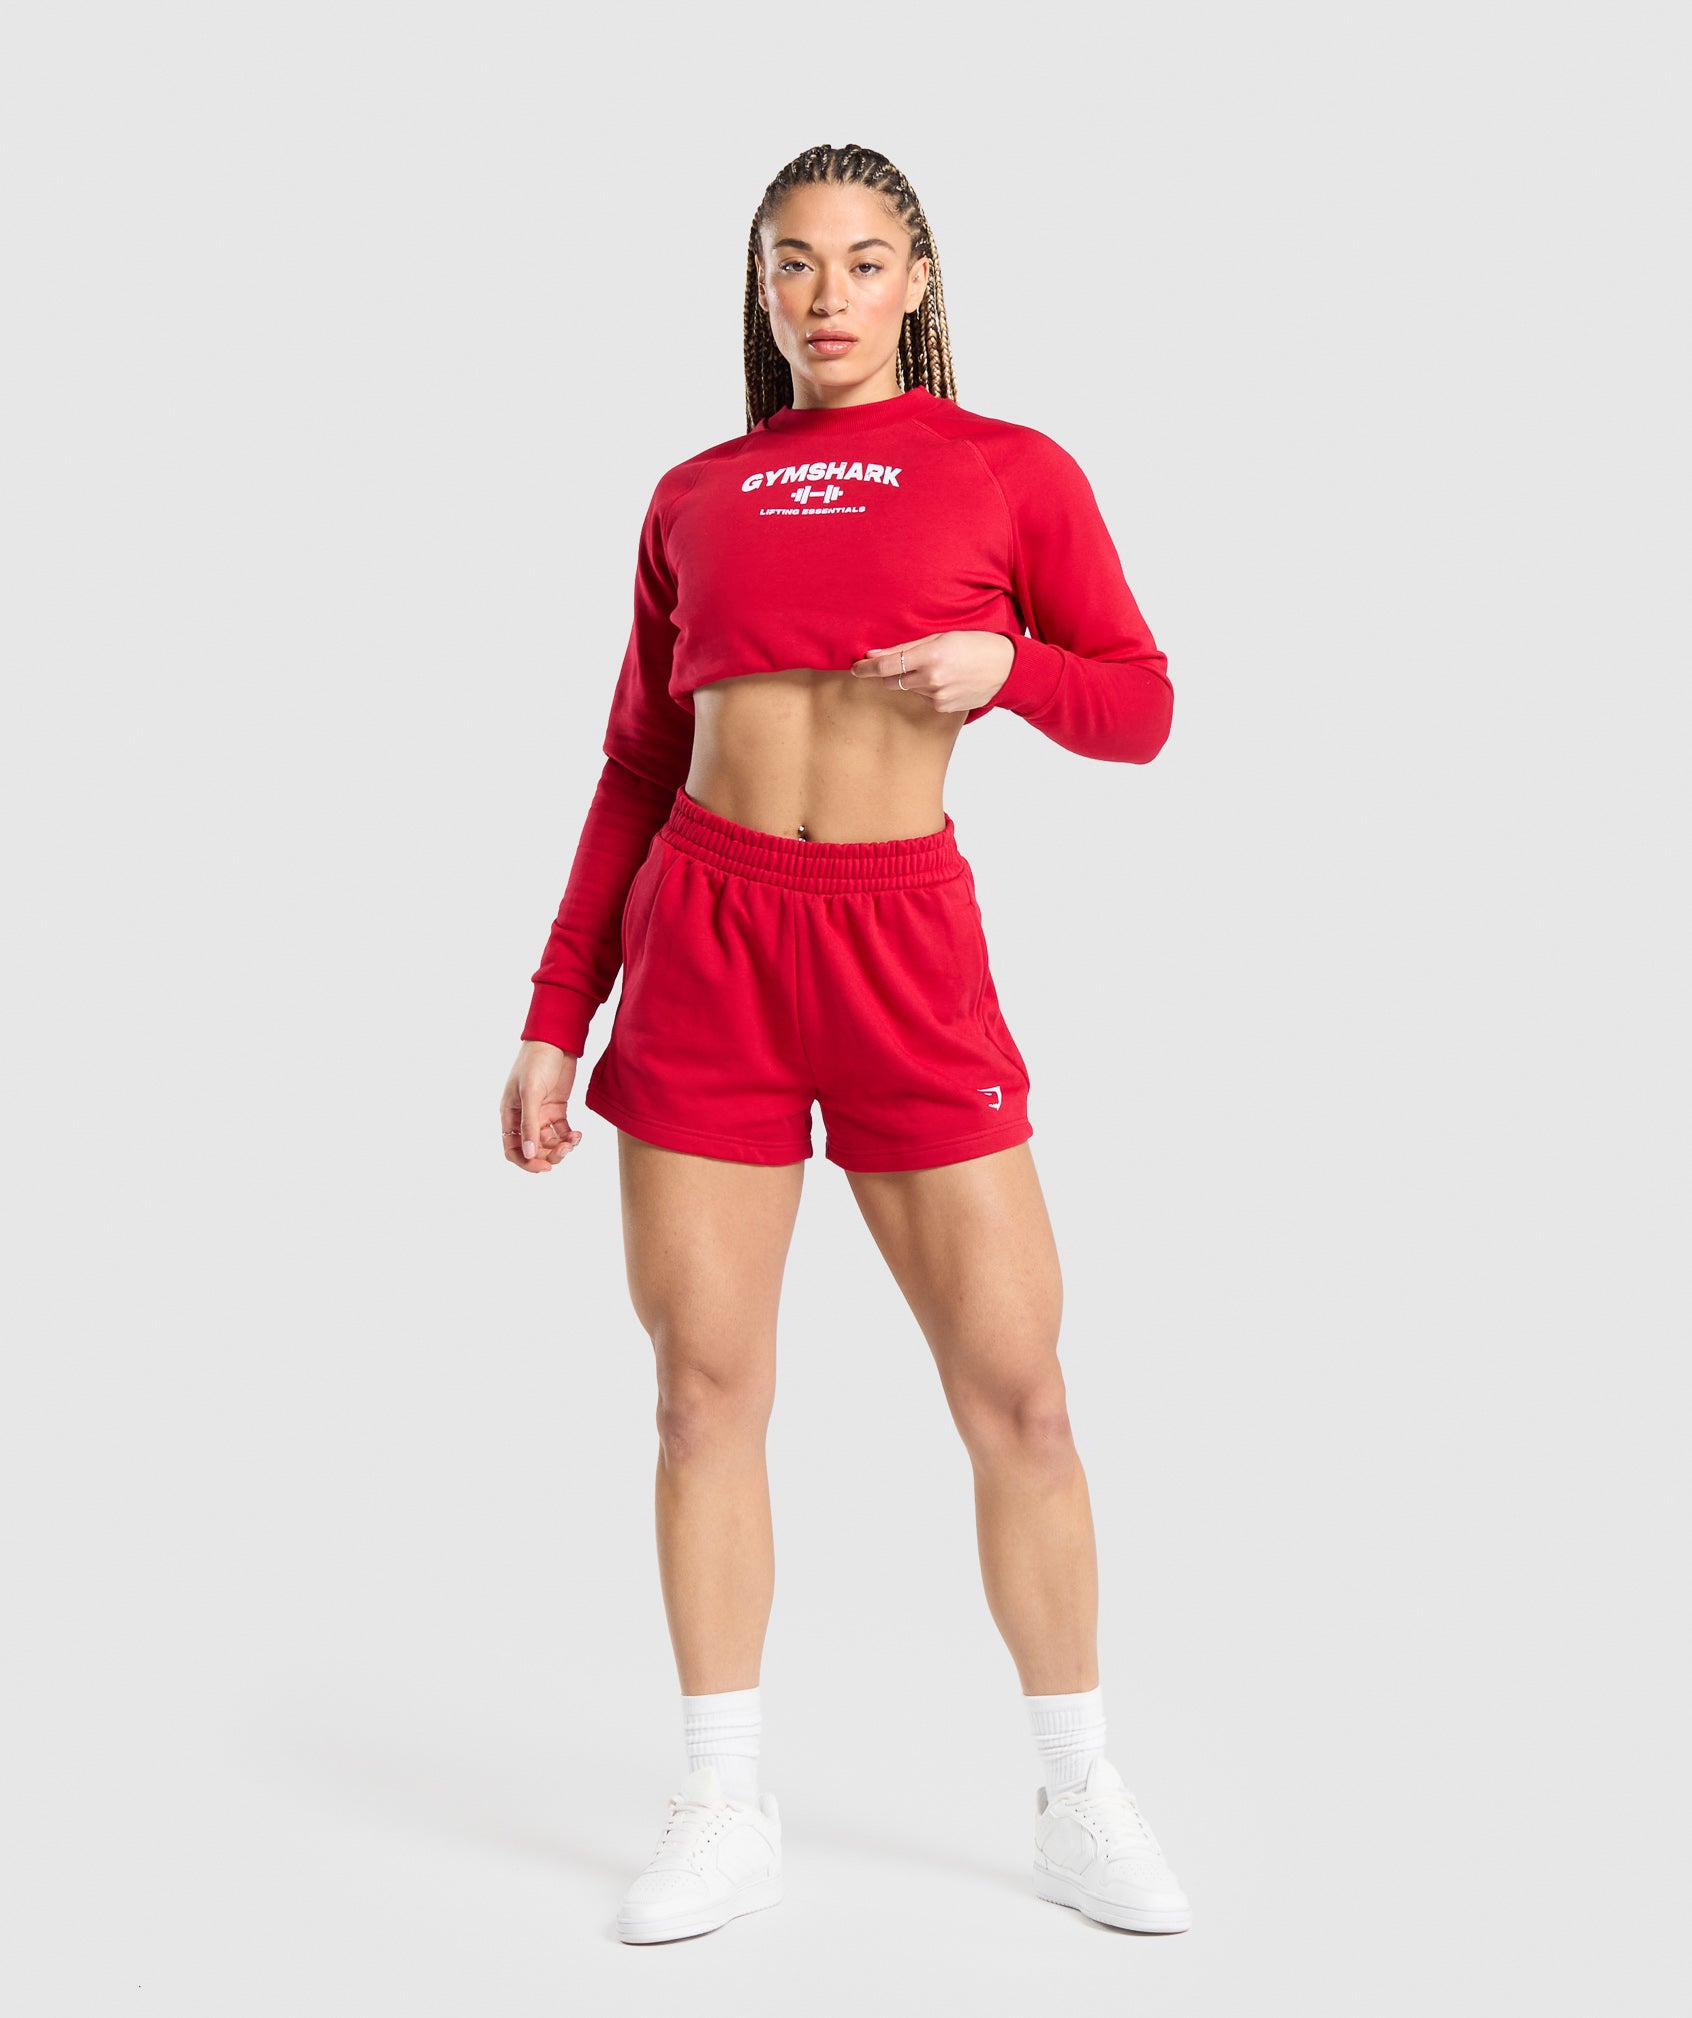 Team GS Cropped Sweatshirt in Carmine Red - view 4